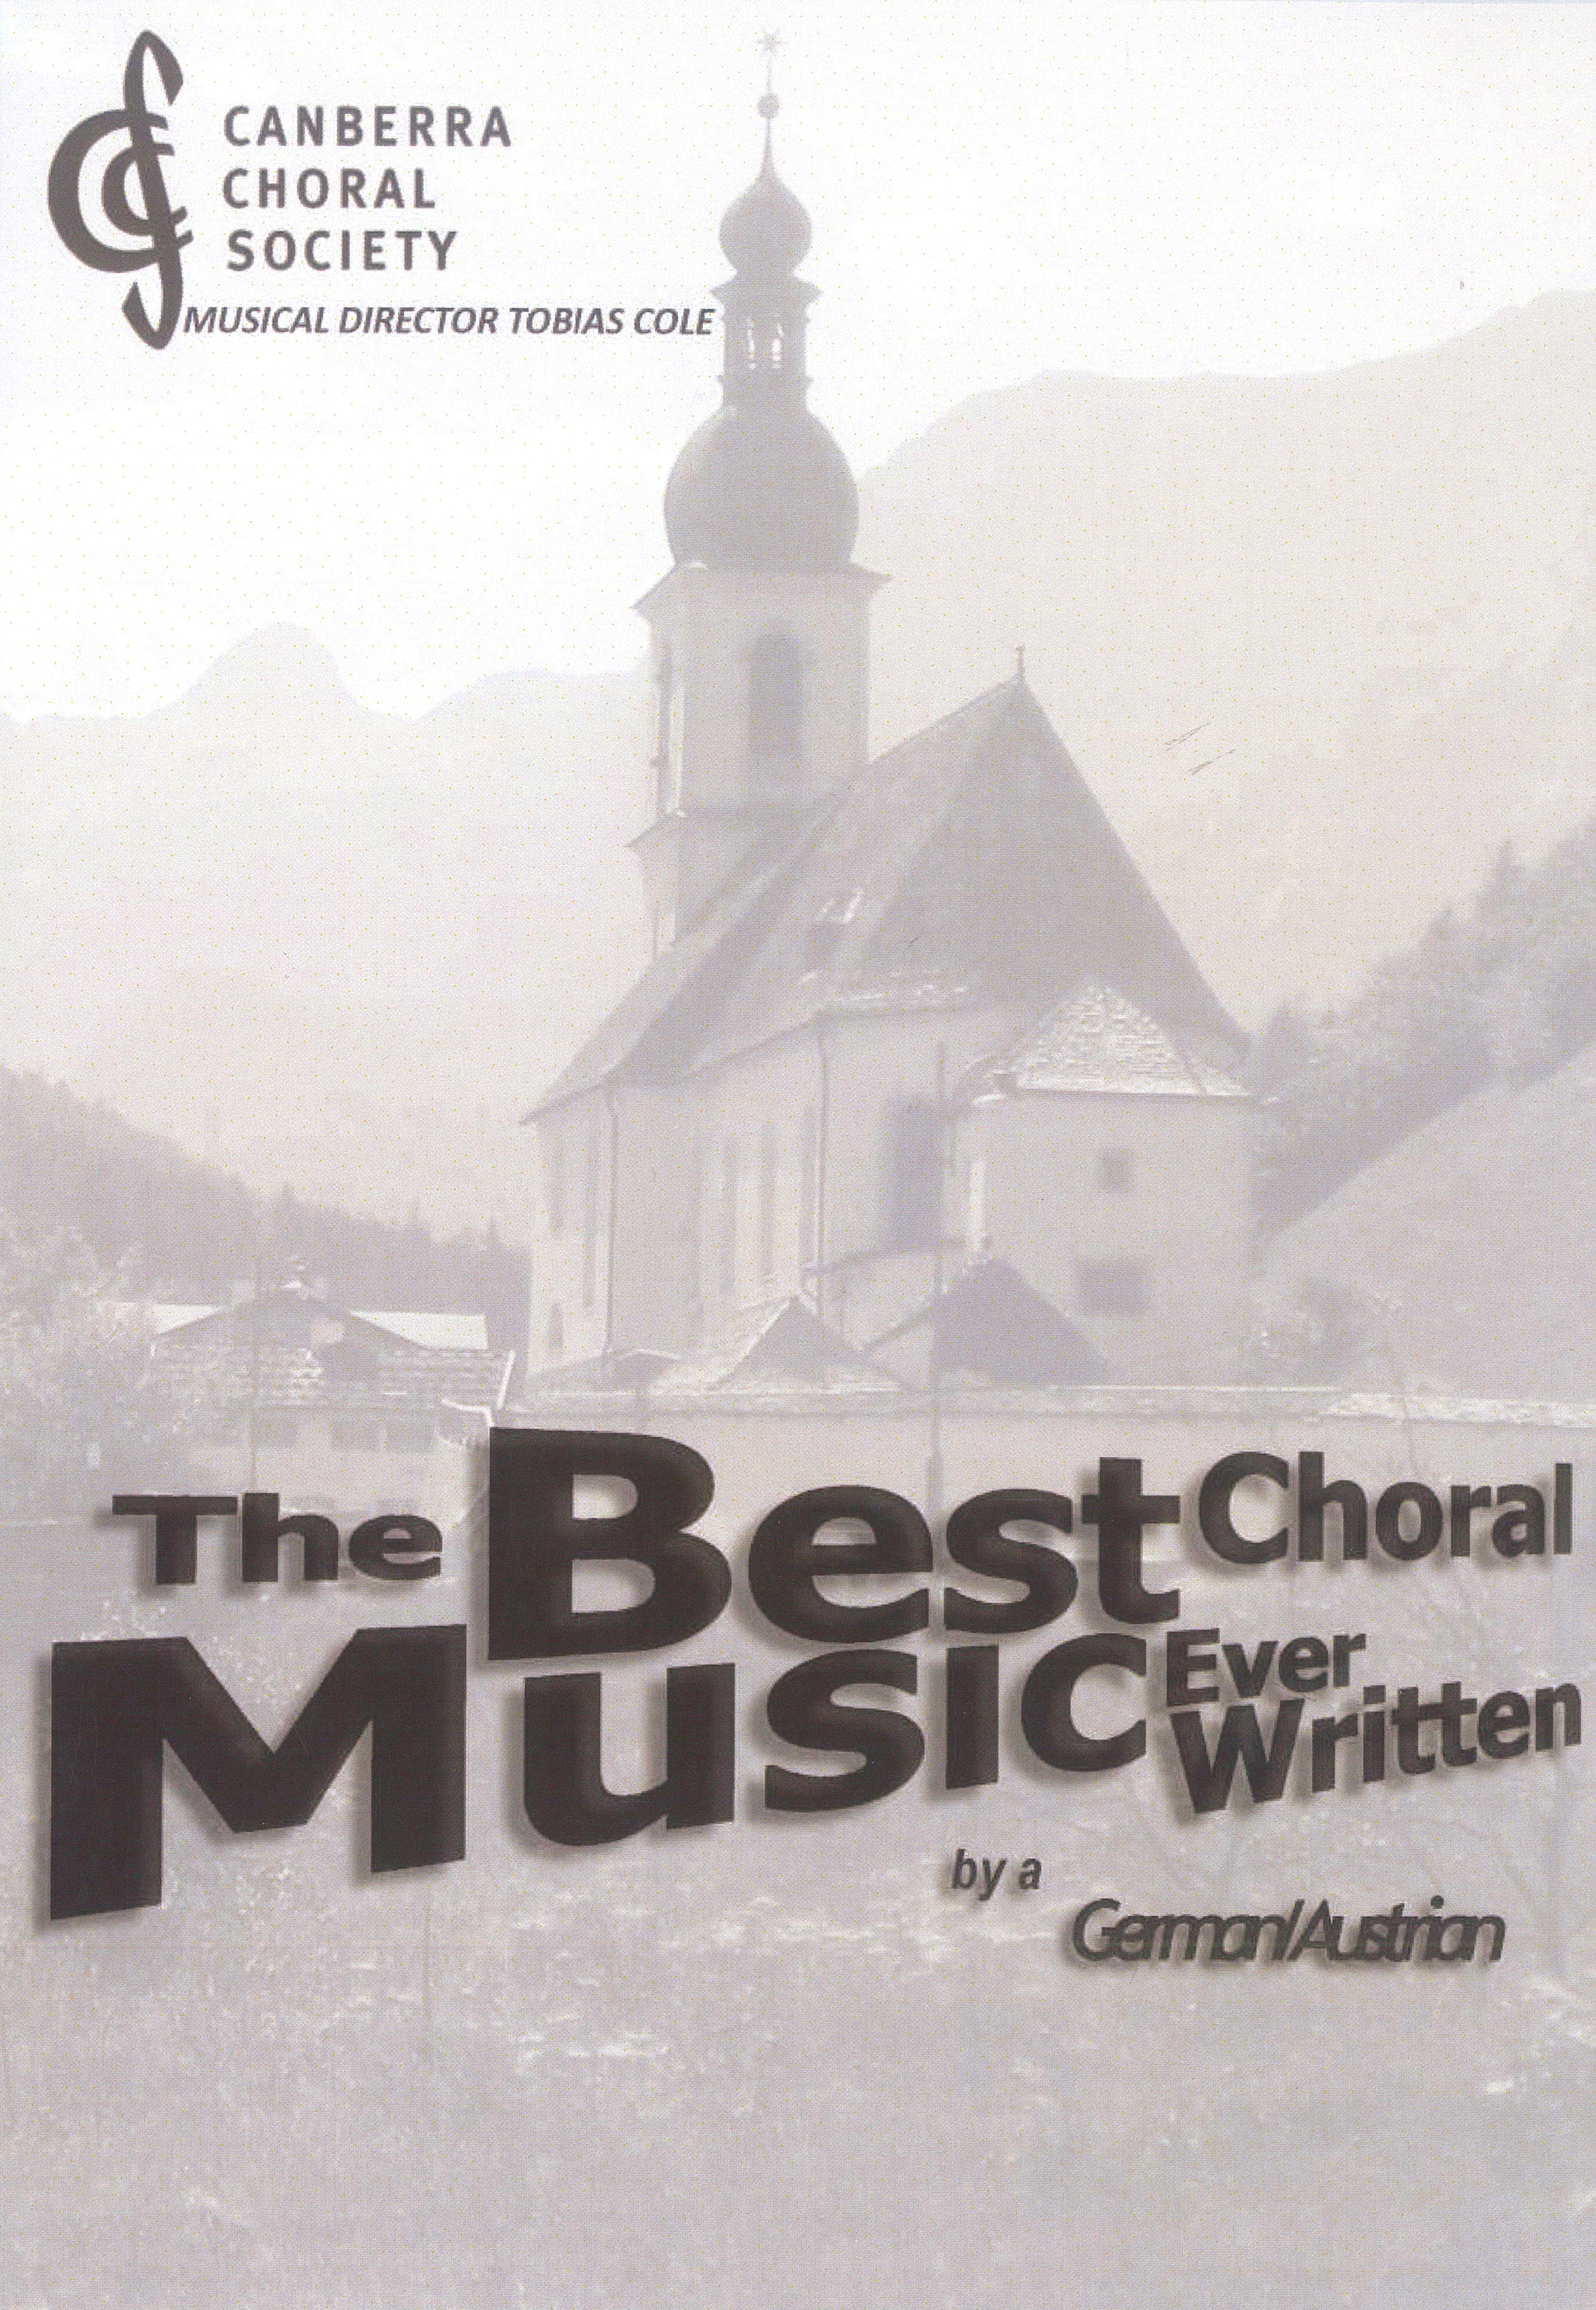 The Best Choral Music Ever Written by a German/Austrian 2011